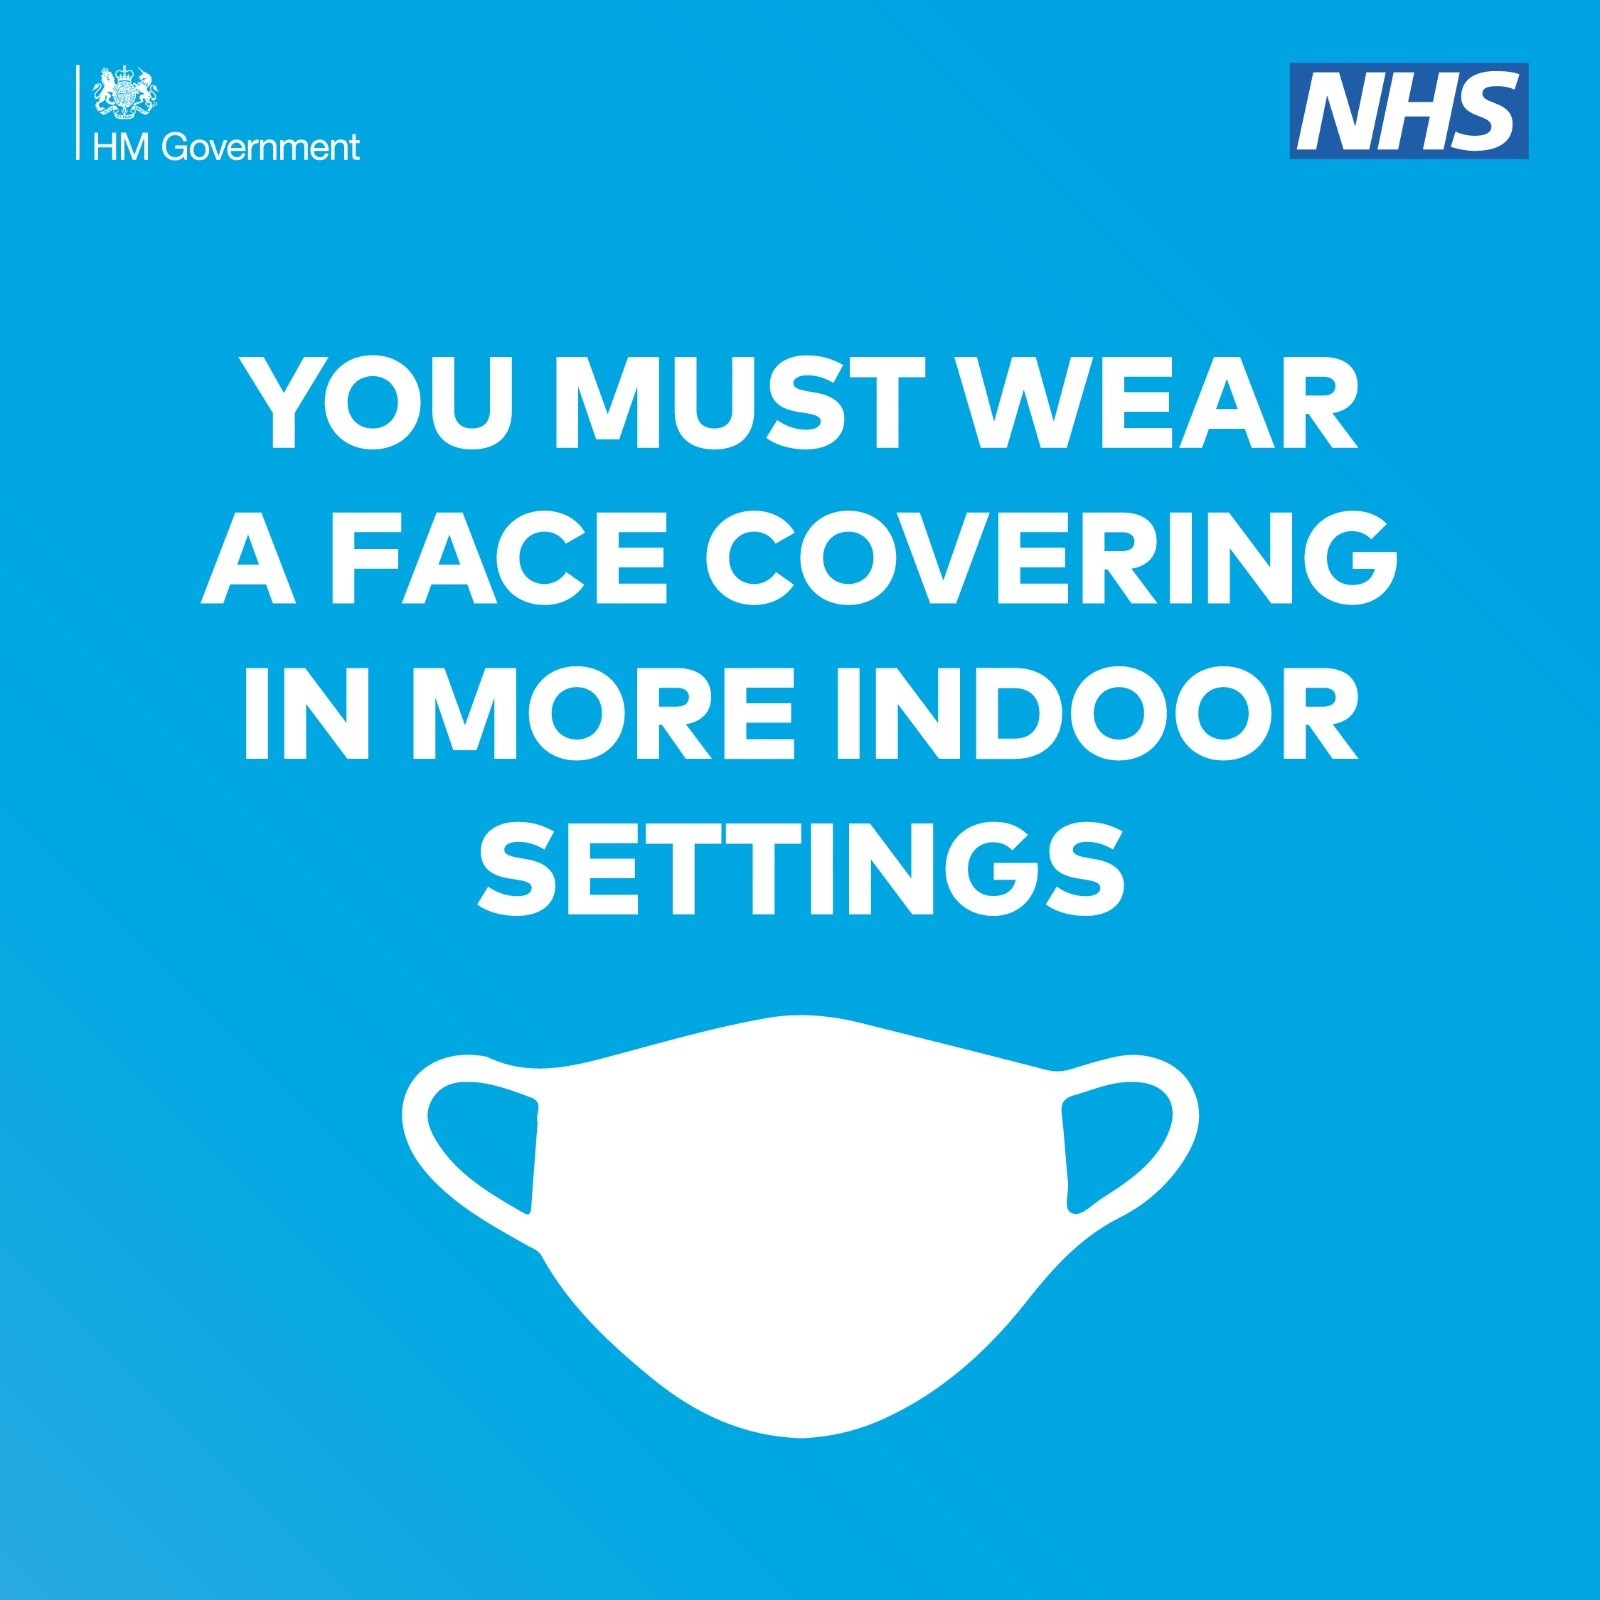 Wear a face covering indoors